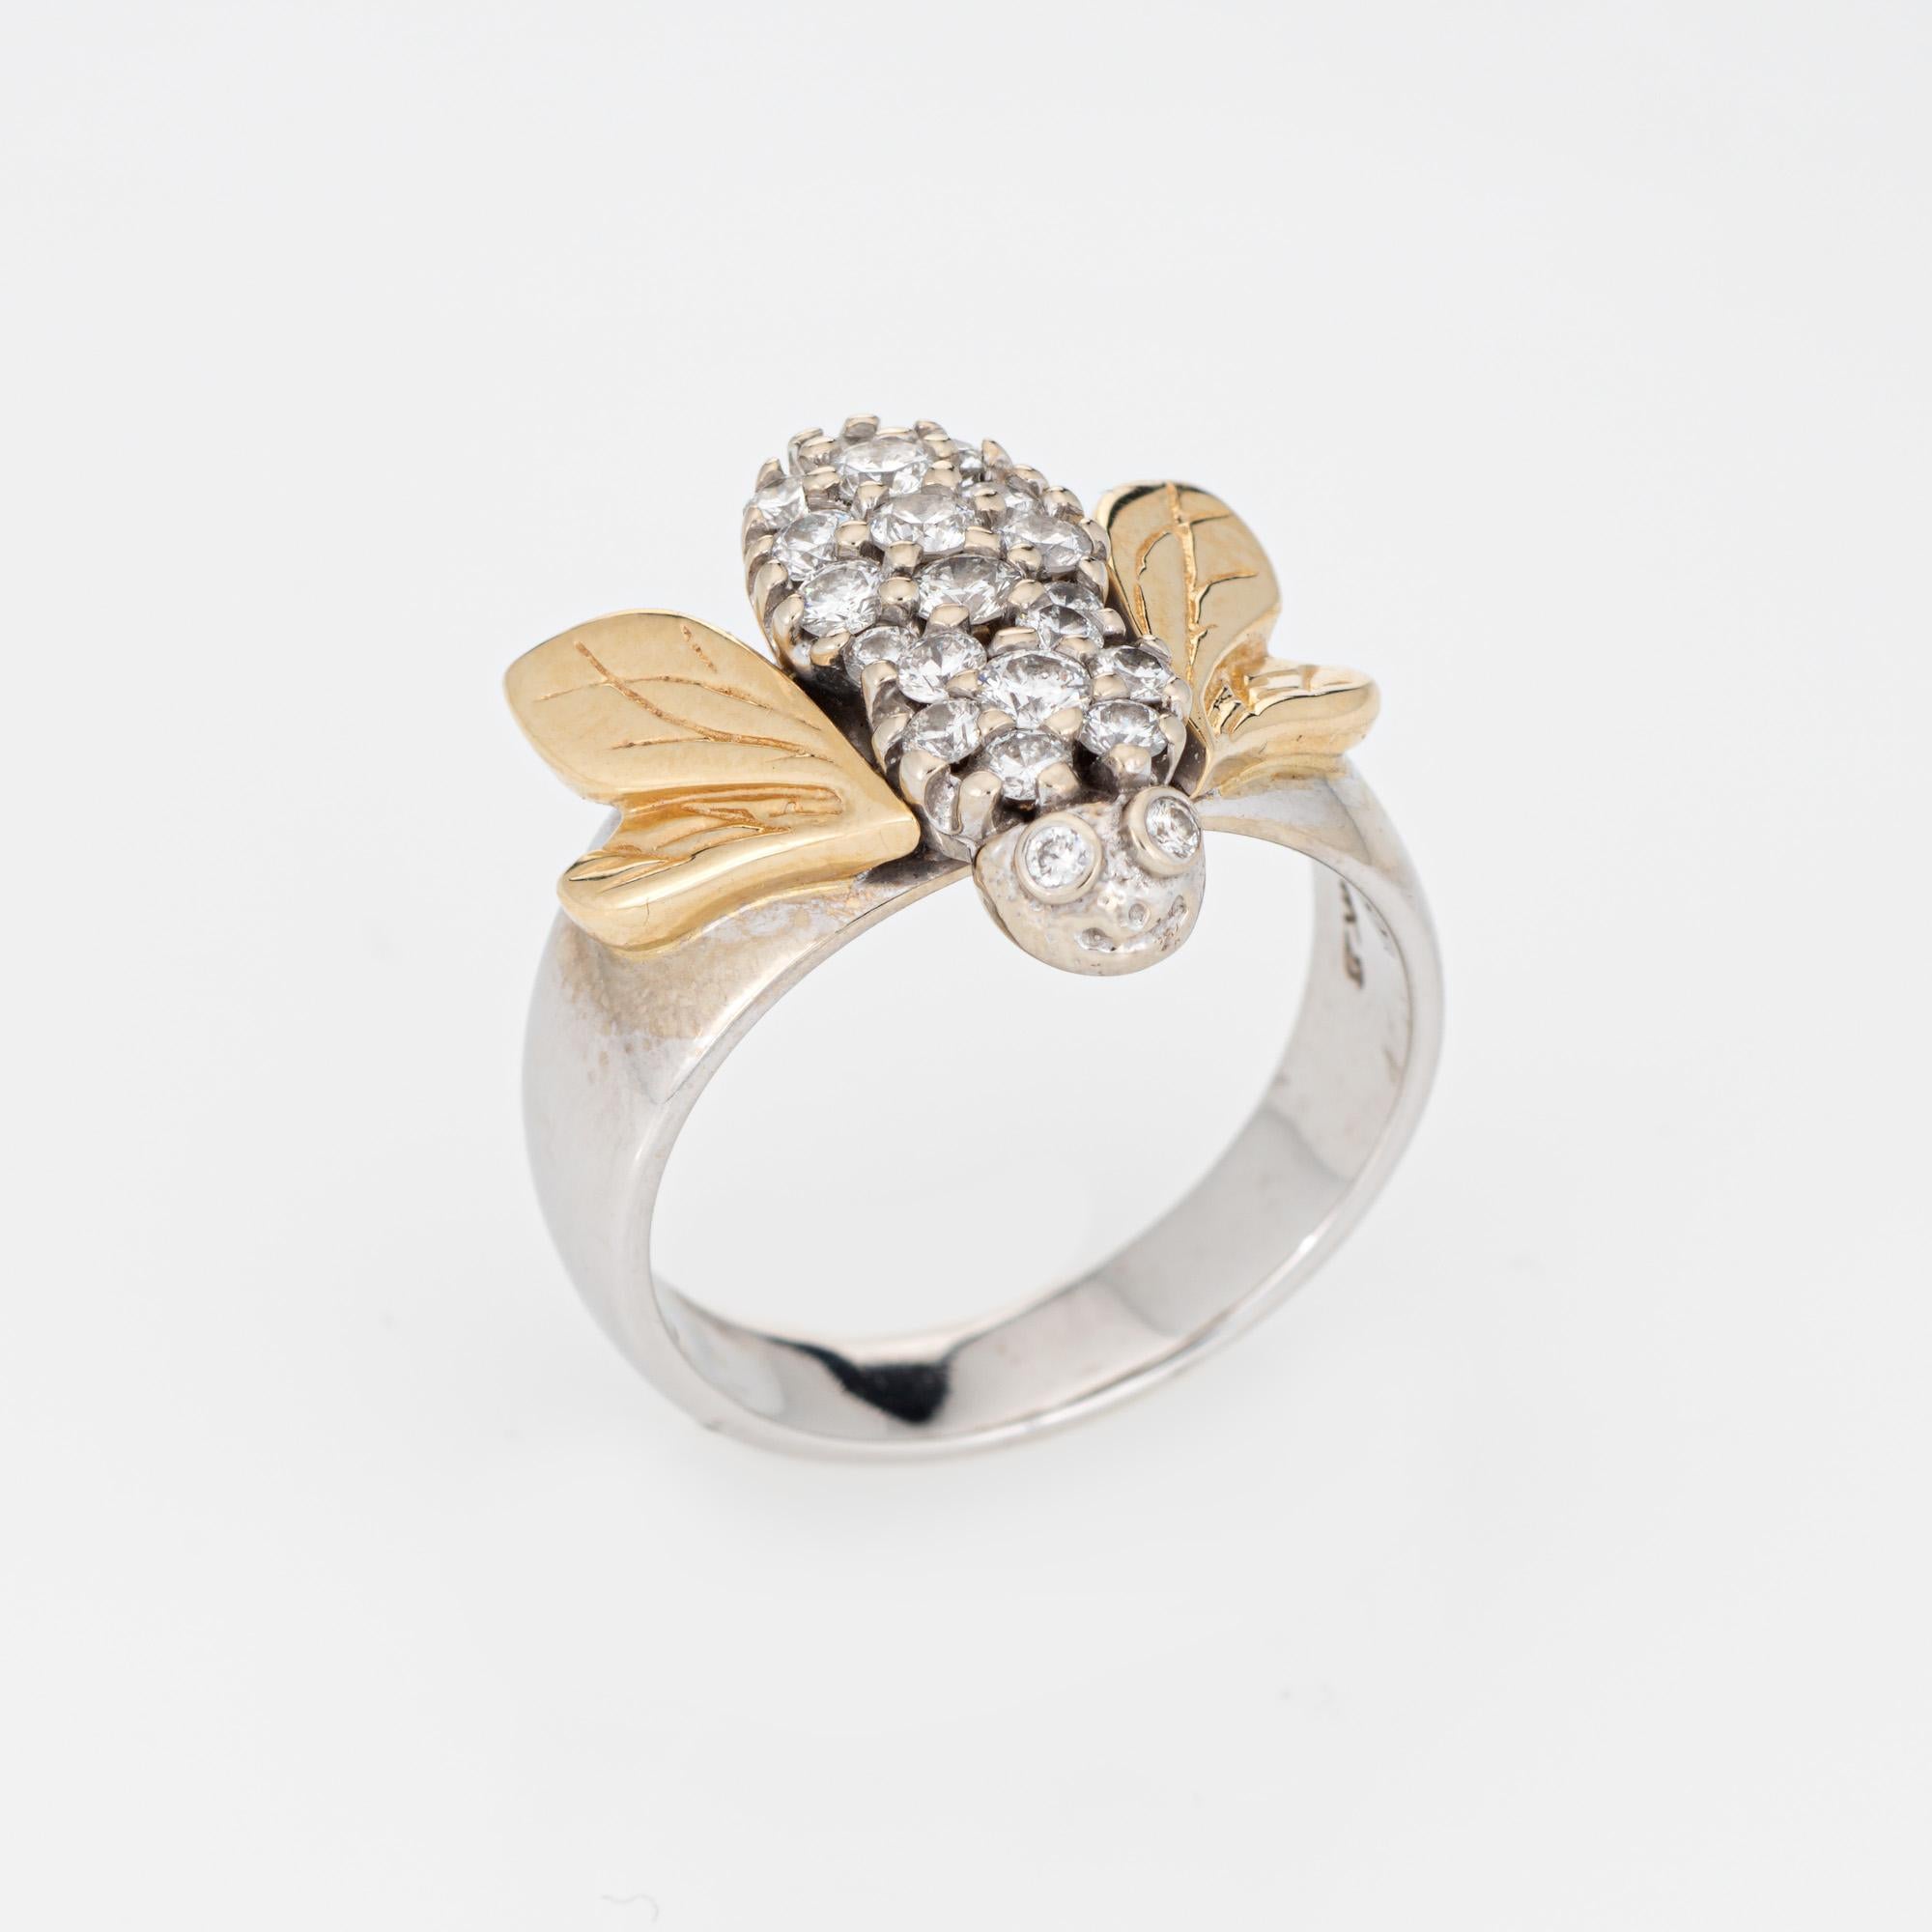 Stylish bumble bee cocktail ring, crafted in 14 karat white & yellow gold. 

Round brilliant cut diamonds total an estimated 0.65 carats (estimated at H-I color and SI1-I1 clarity).

